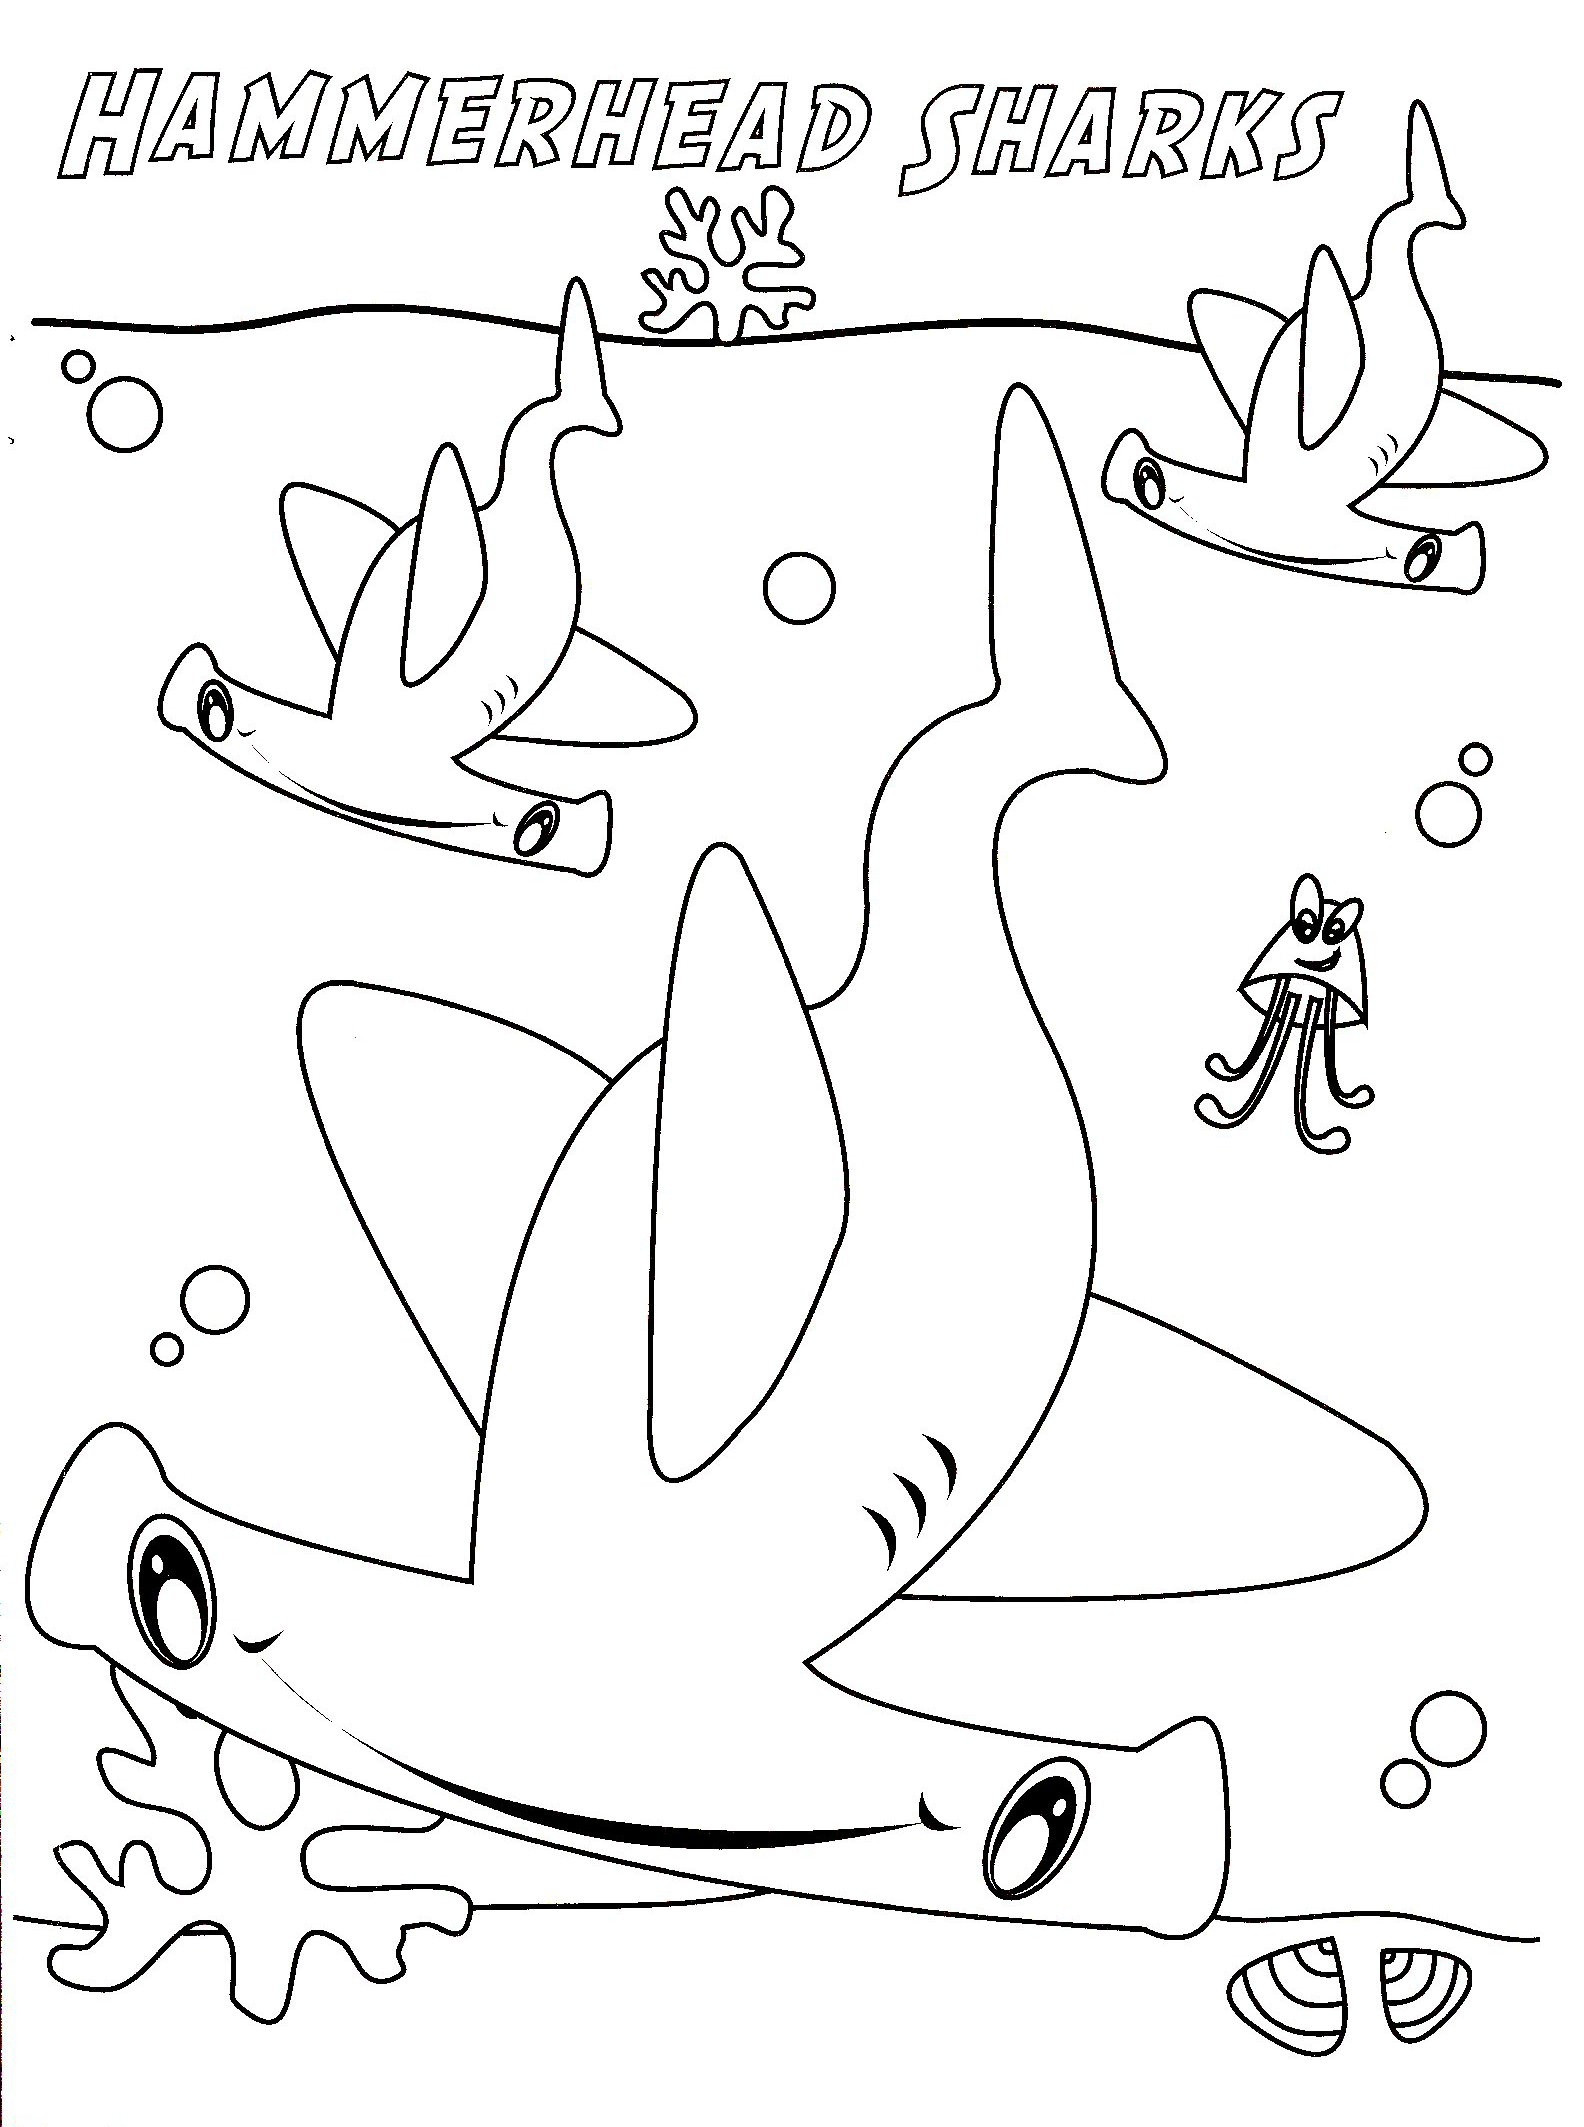 Shark Coloring Pages For Preschoolers at GetDrawings | Free download